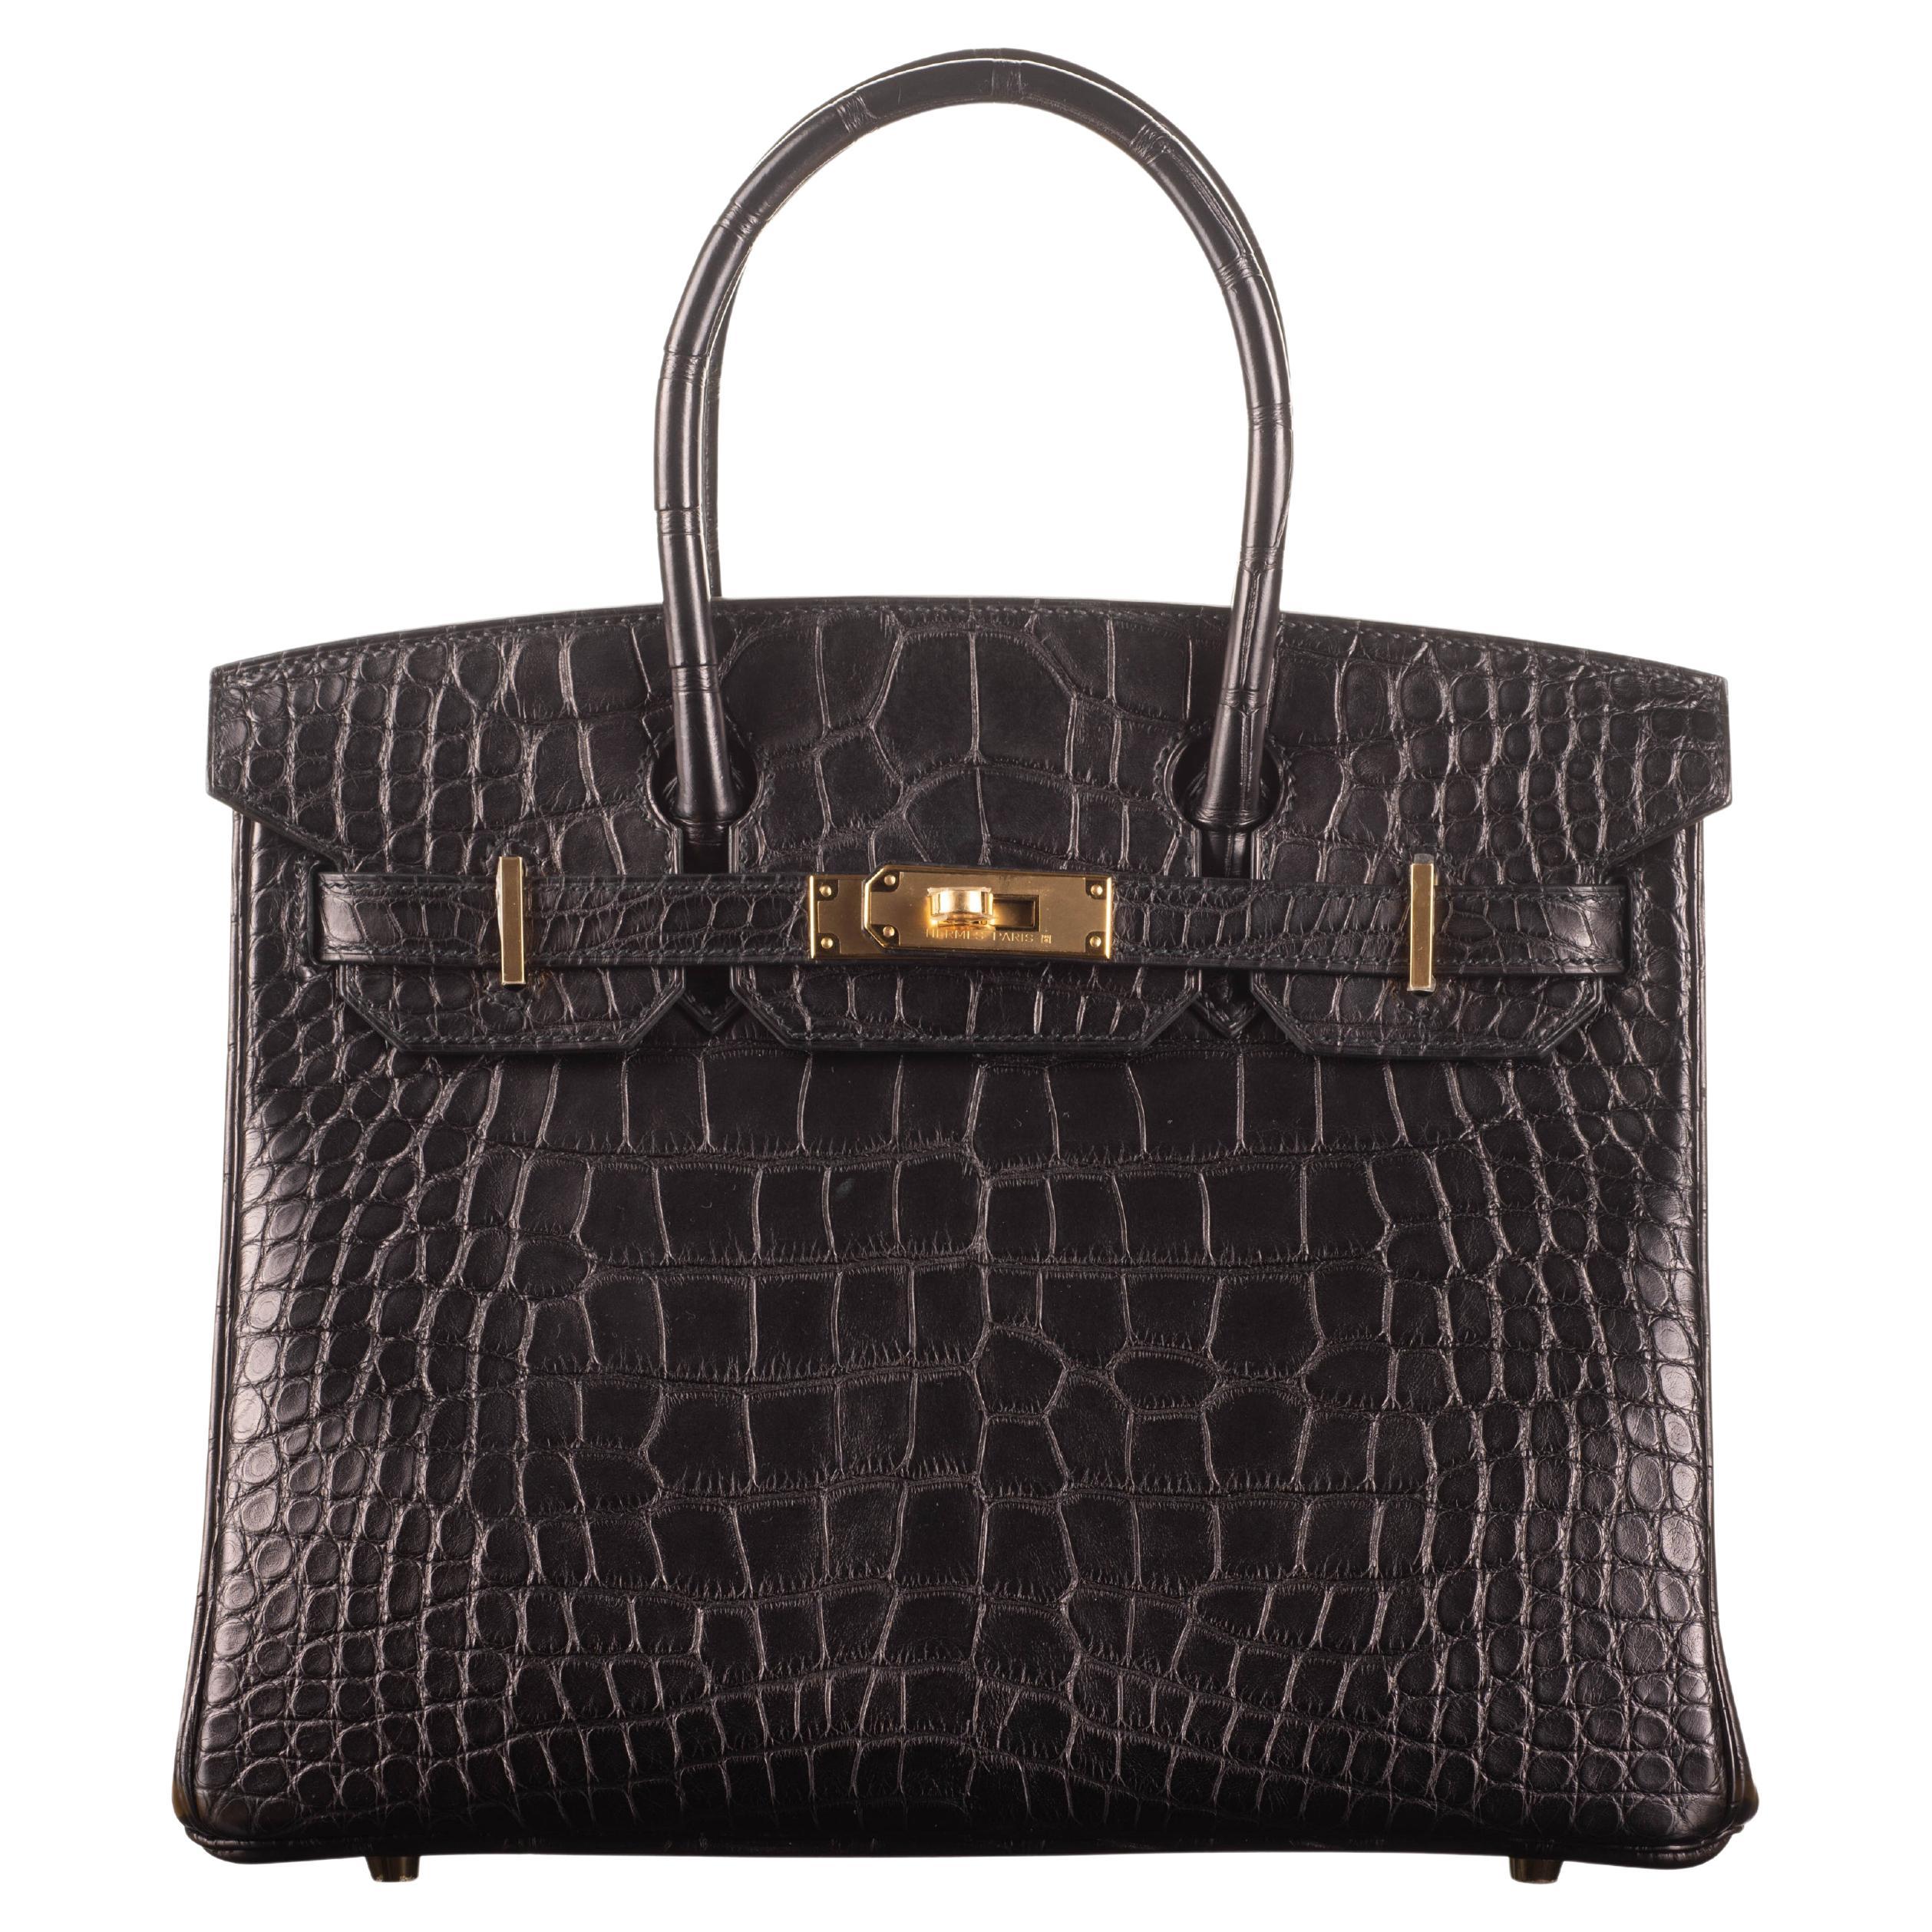 The Most Expensive Hermes Bag Sales at Auction 2022, Handbags and  Accessories